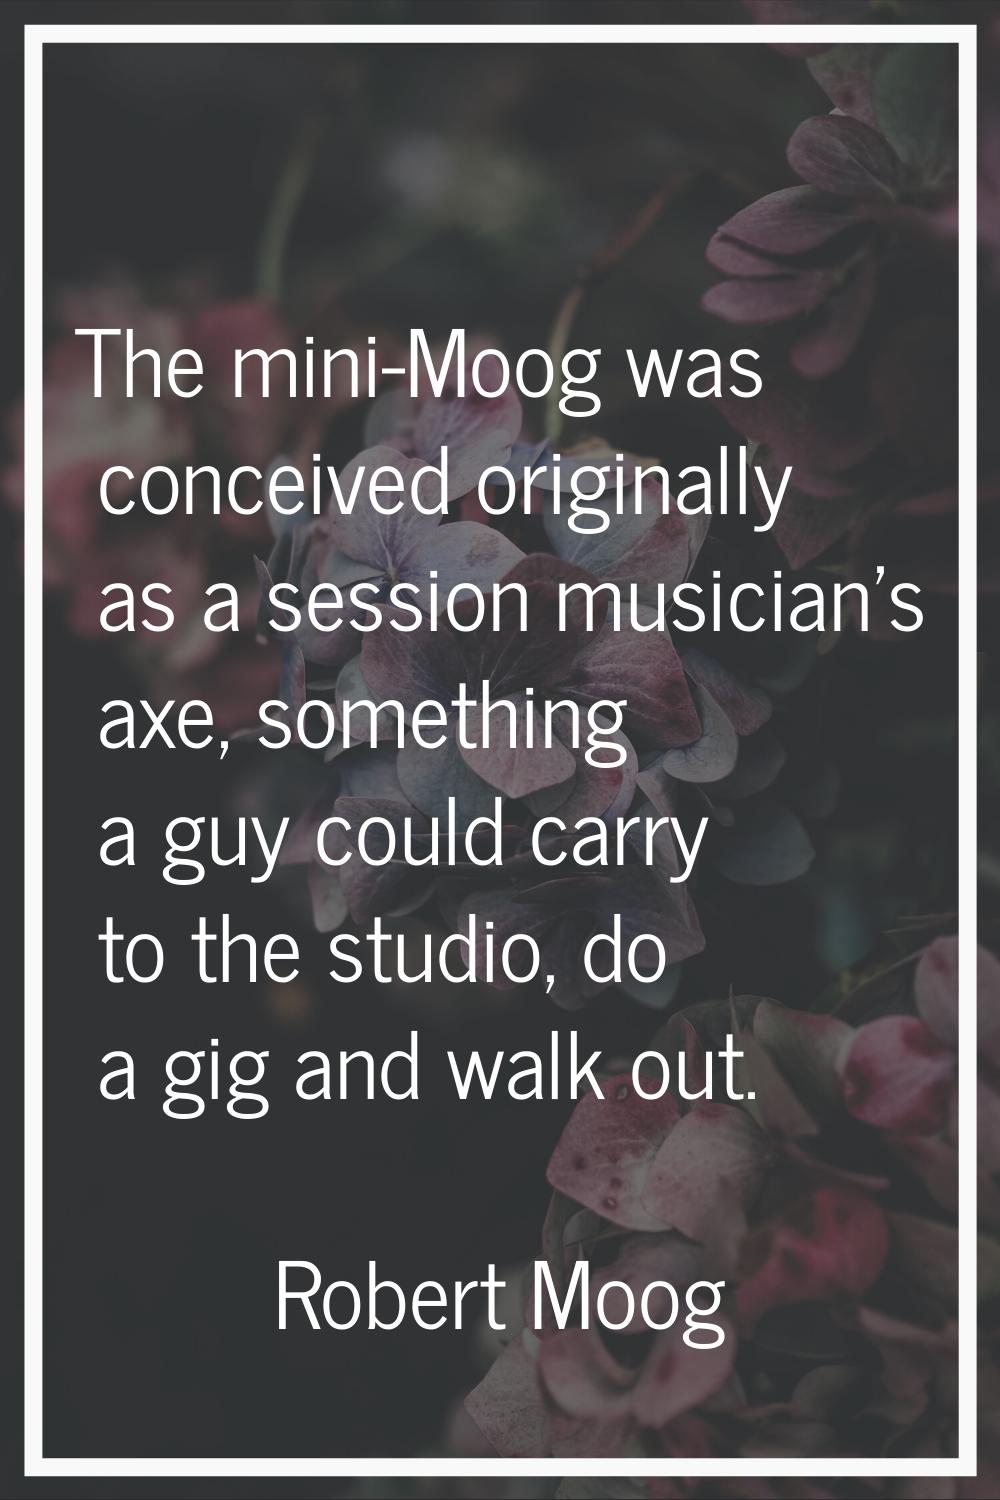 The mini-Moog was conceived originally as a session musician's axe, something a guy could carry to 